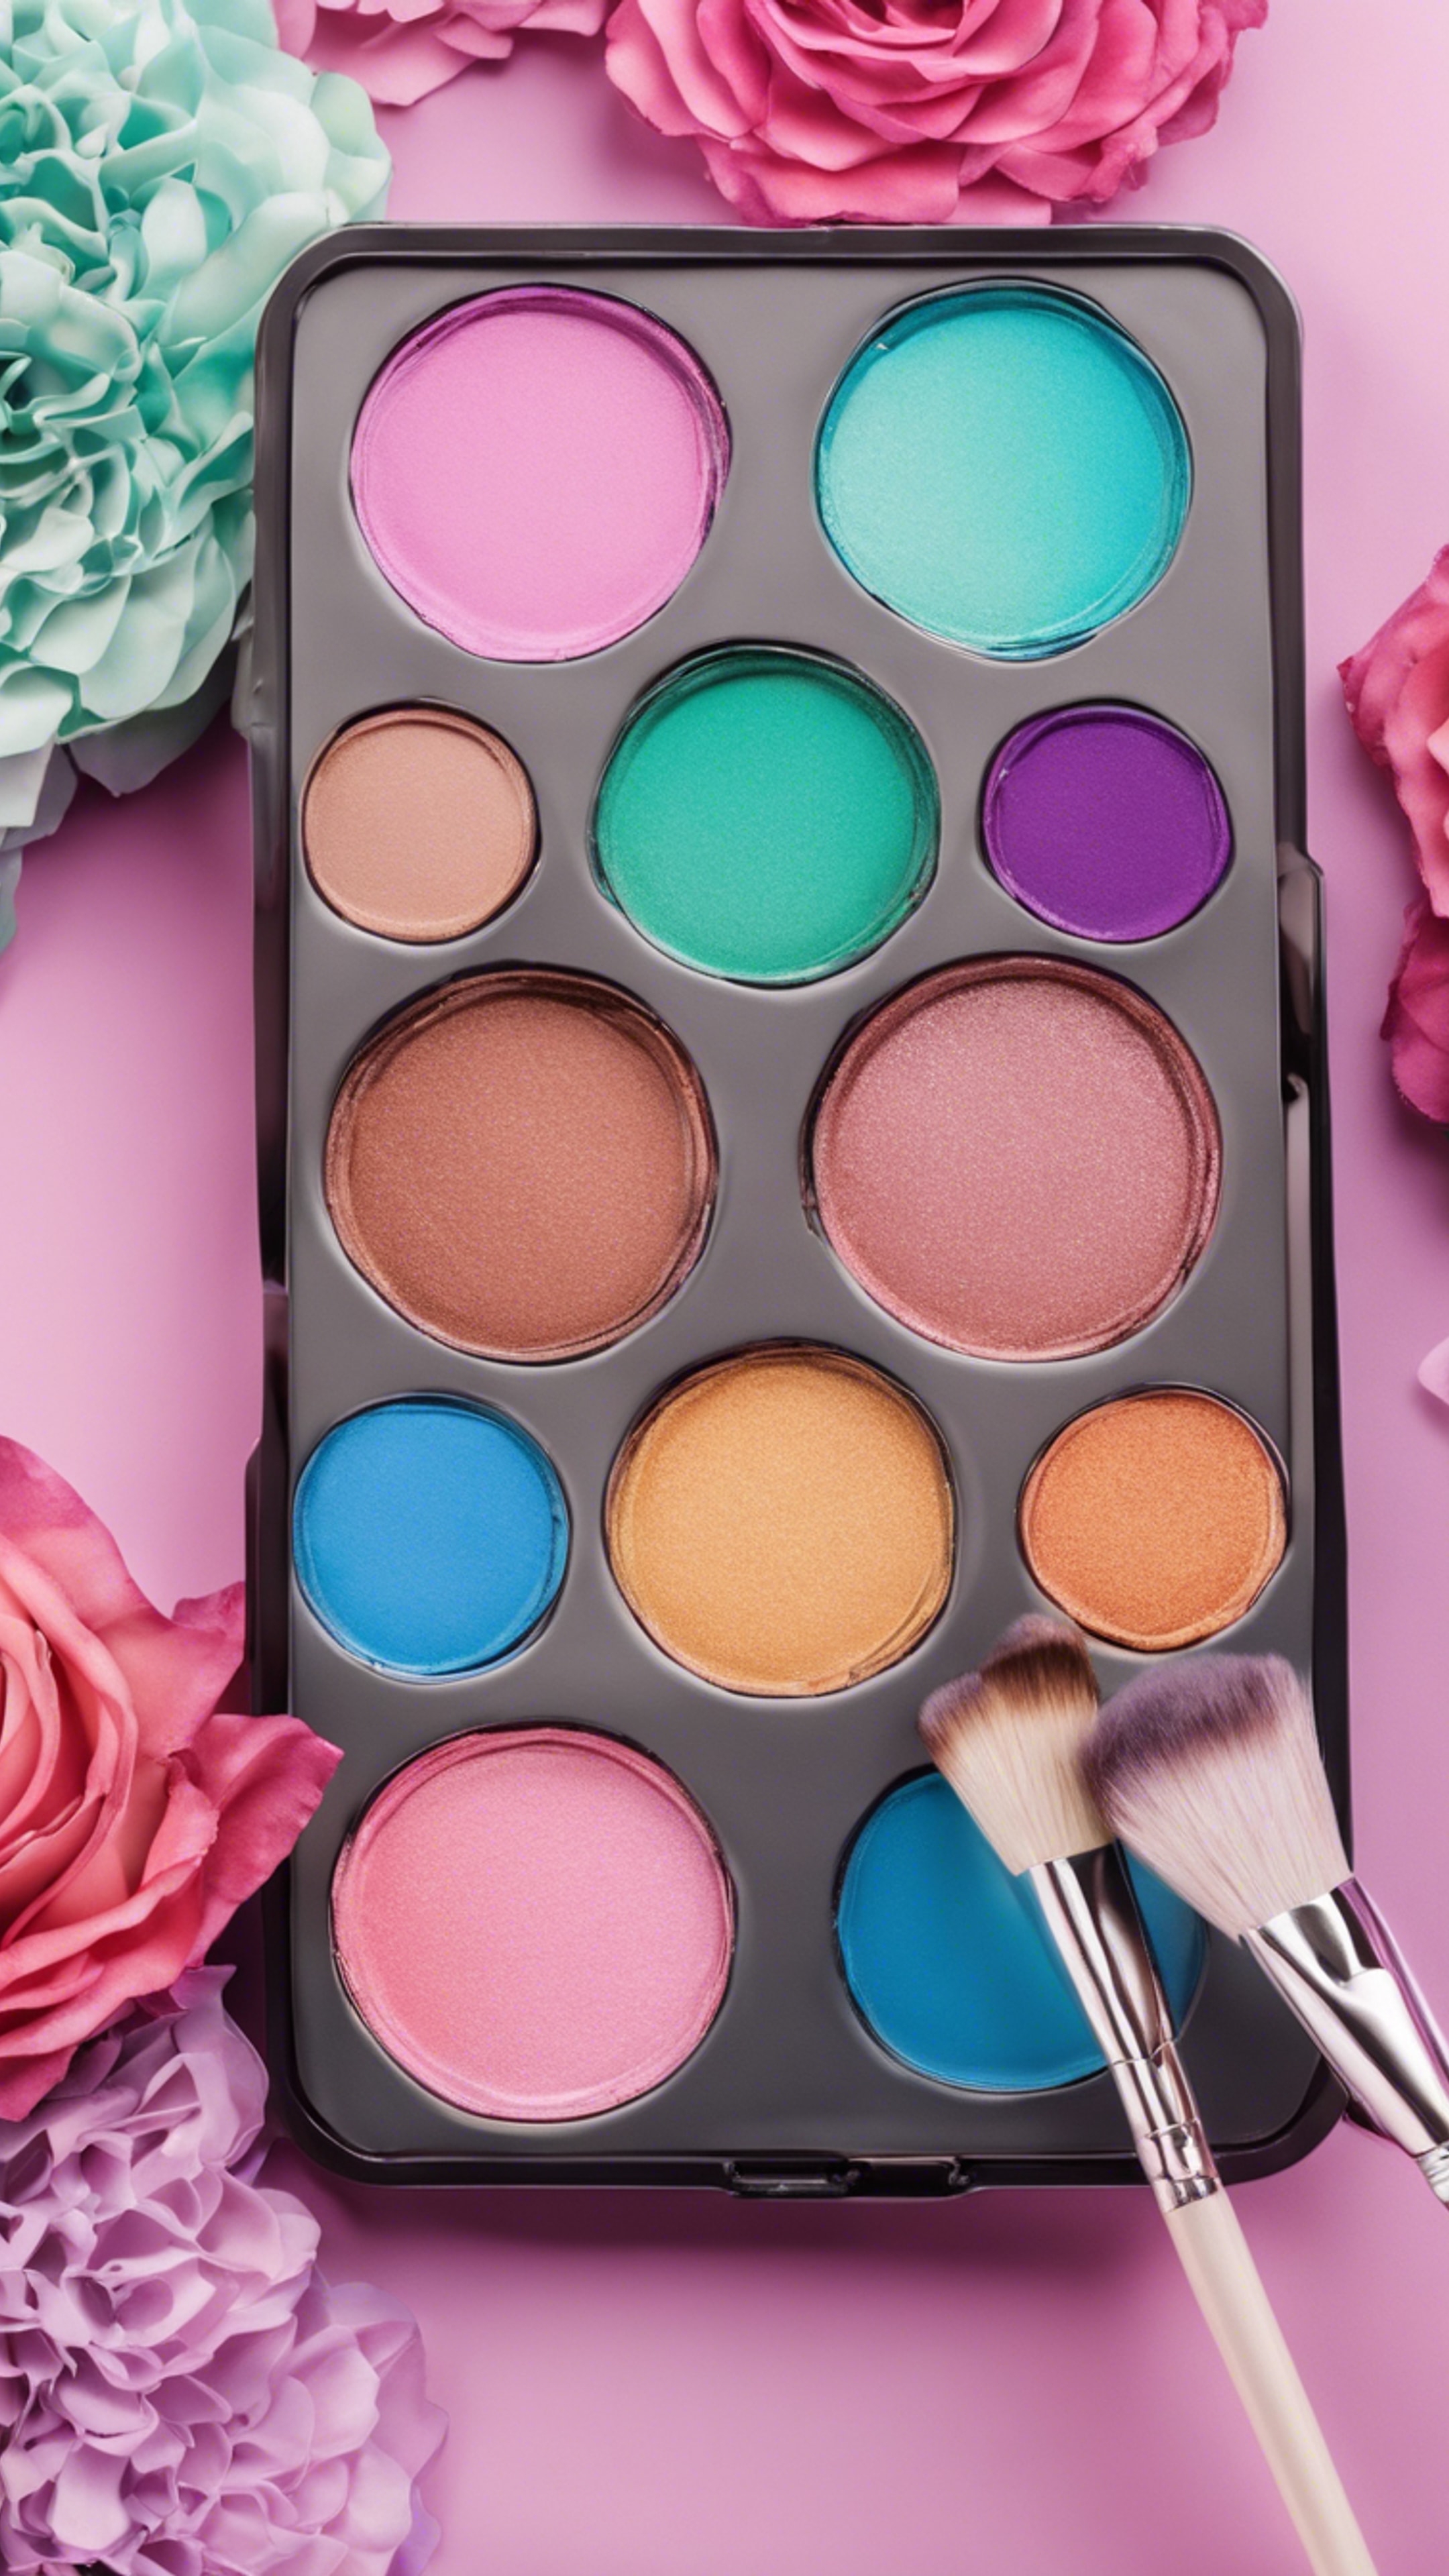 A cute girly makeup palette with a variety of vibrant colors and a brush for application. 벽지[6f3ccf3758d549978770]